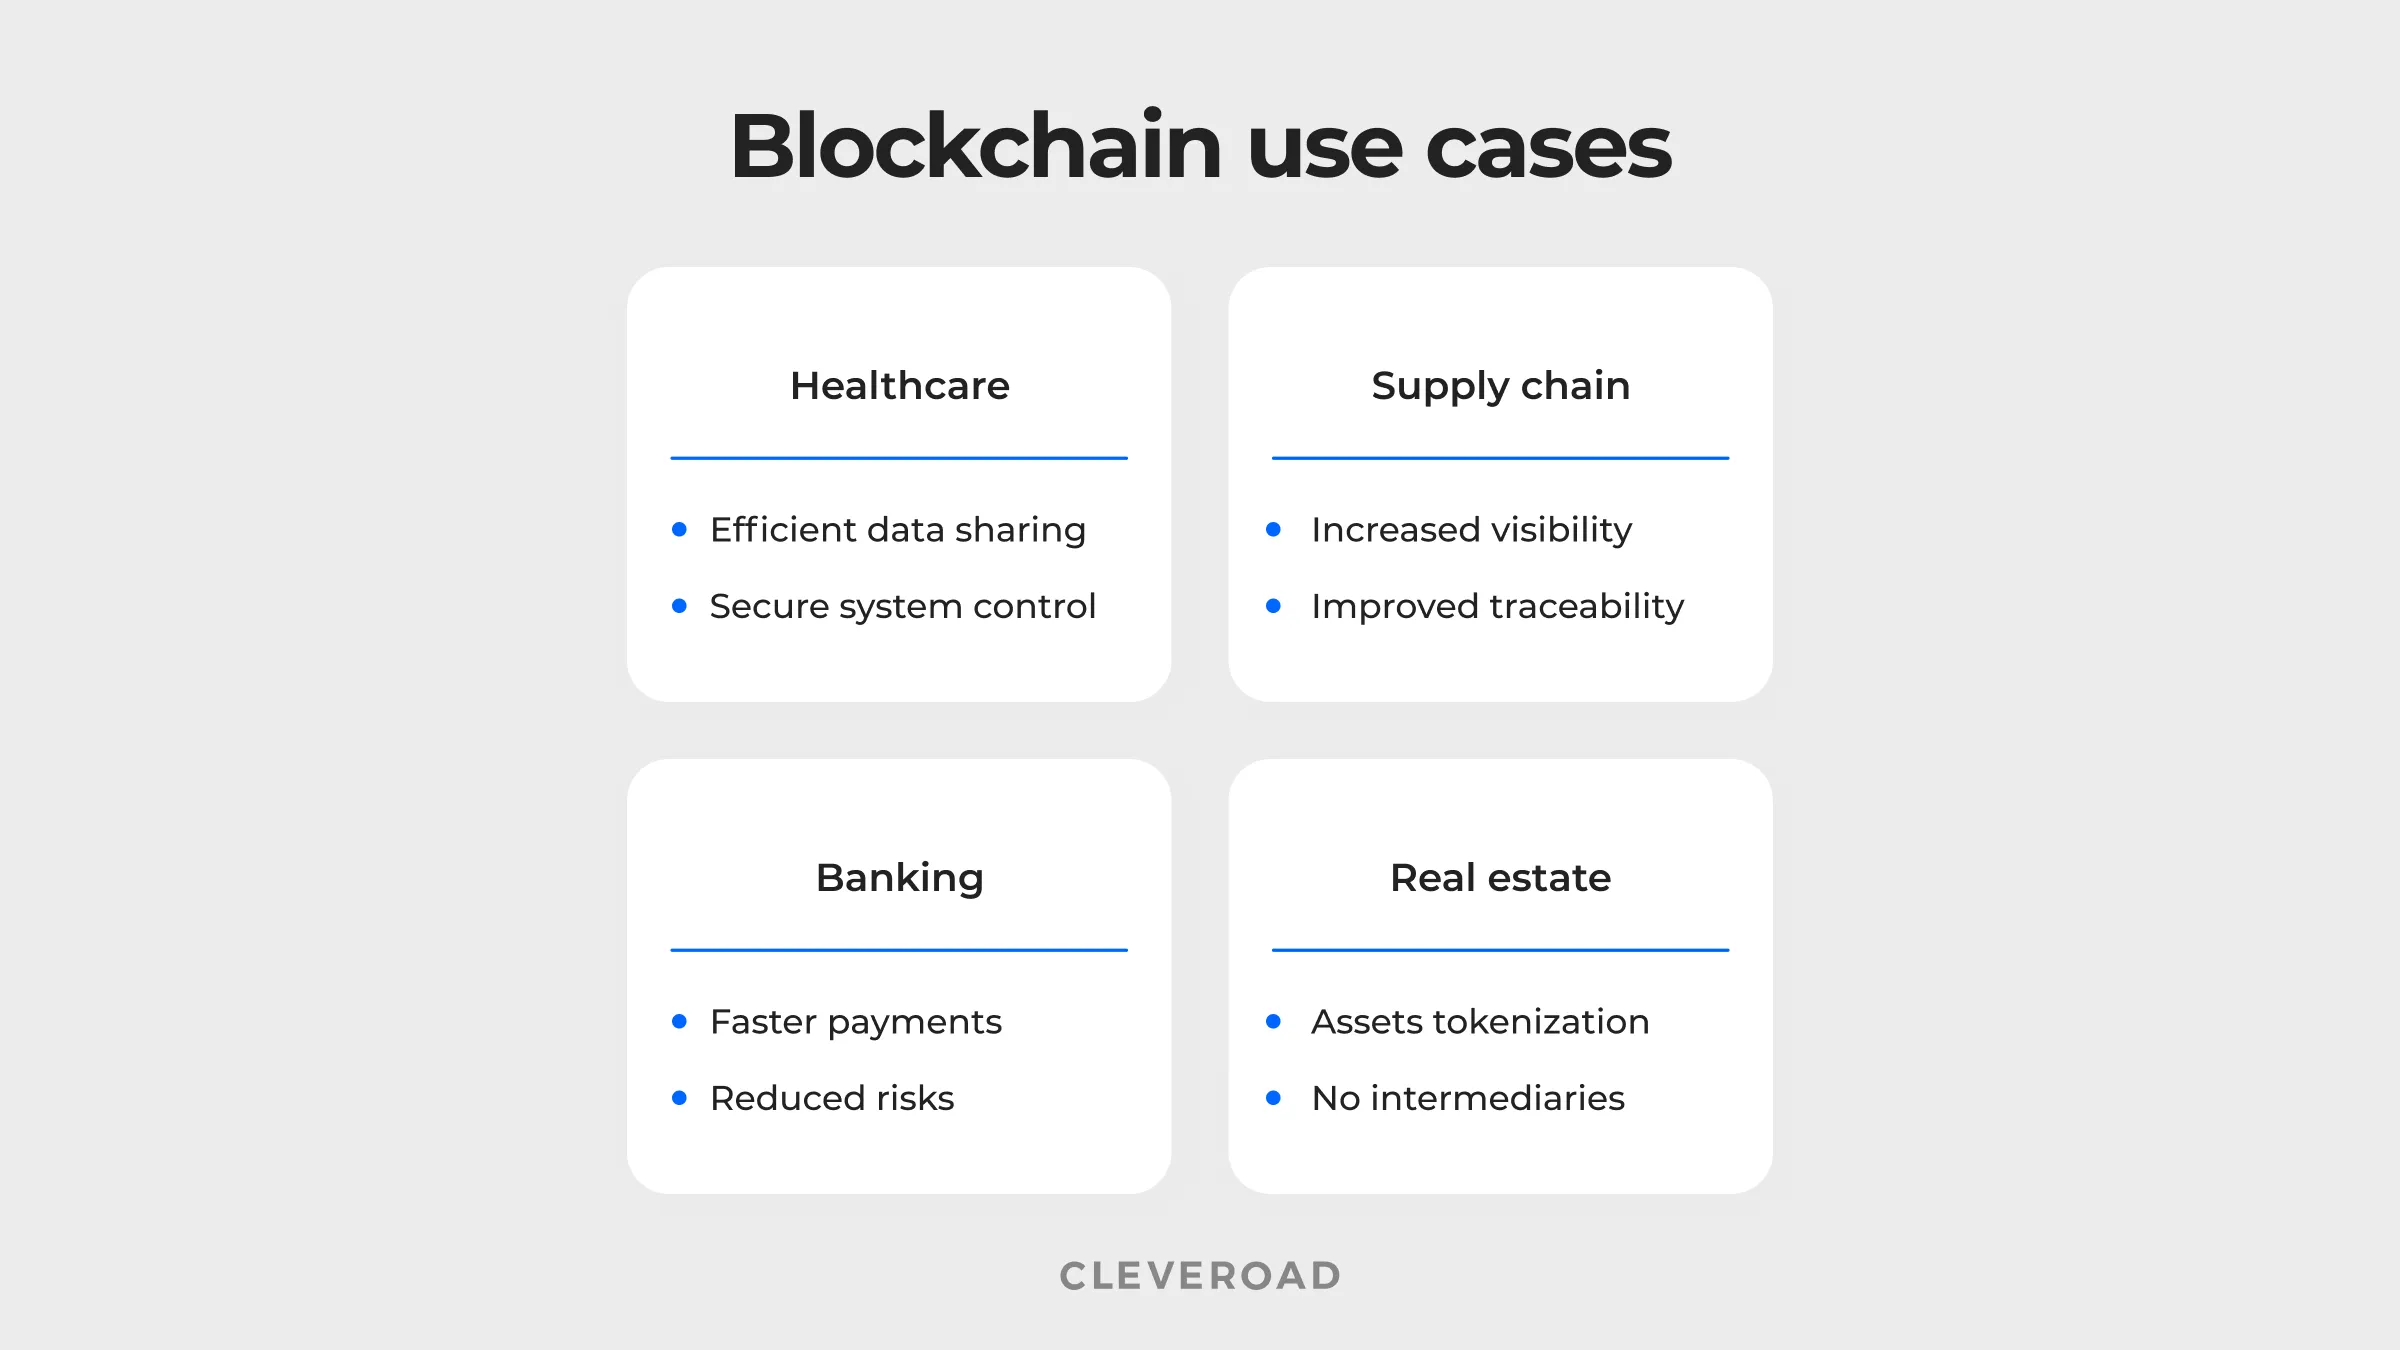 Examples of using blockchain solutions in different industries